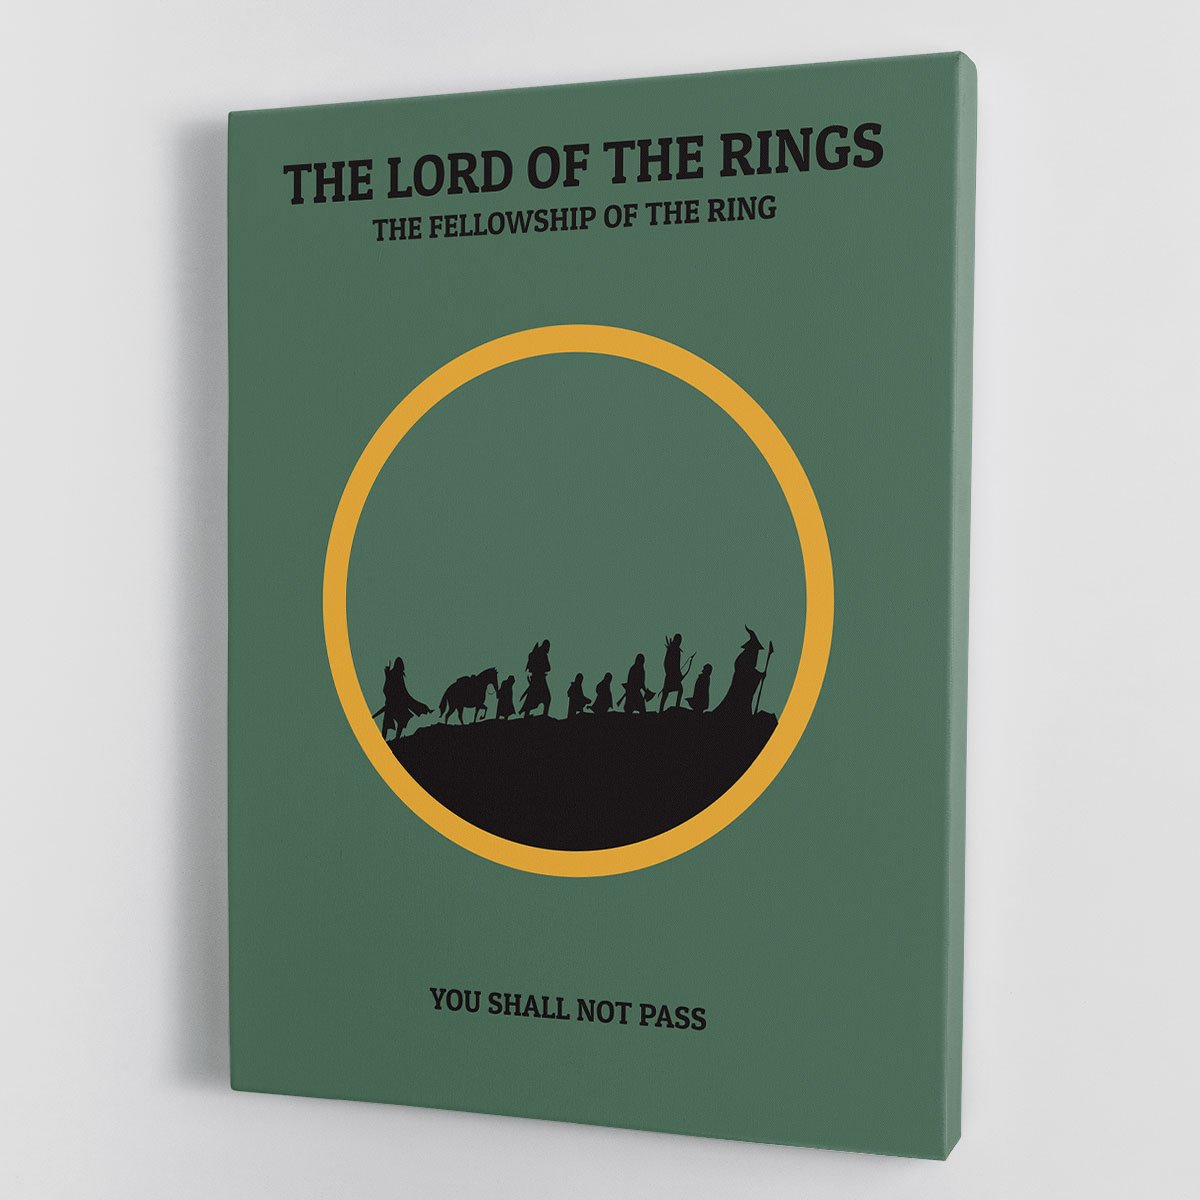 The Lord Of The Rings Fellowship If The Ring Minimal Movie Canvas Print or Poster